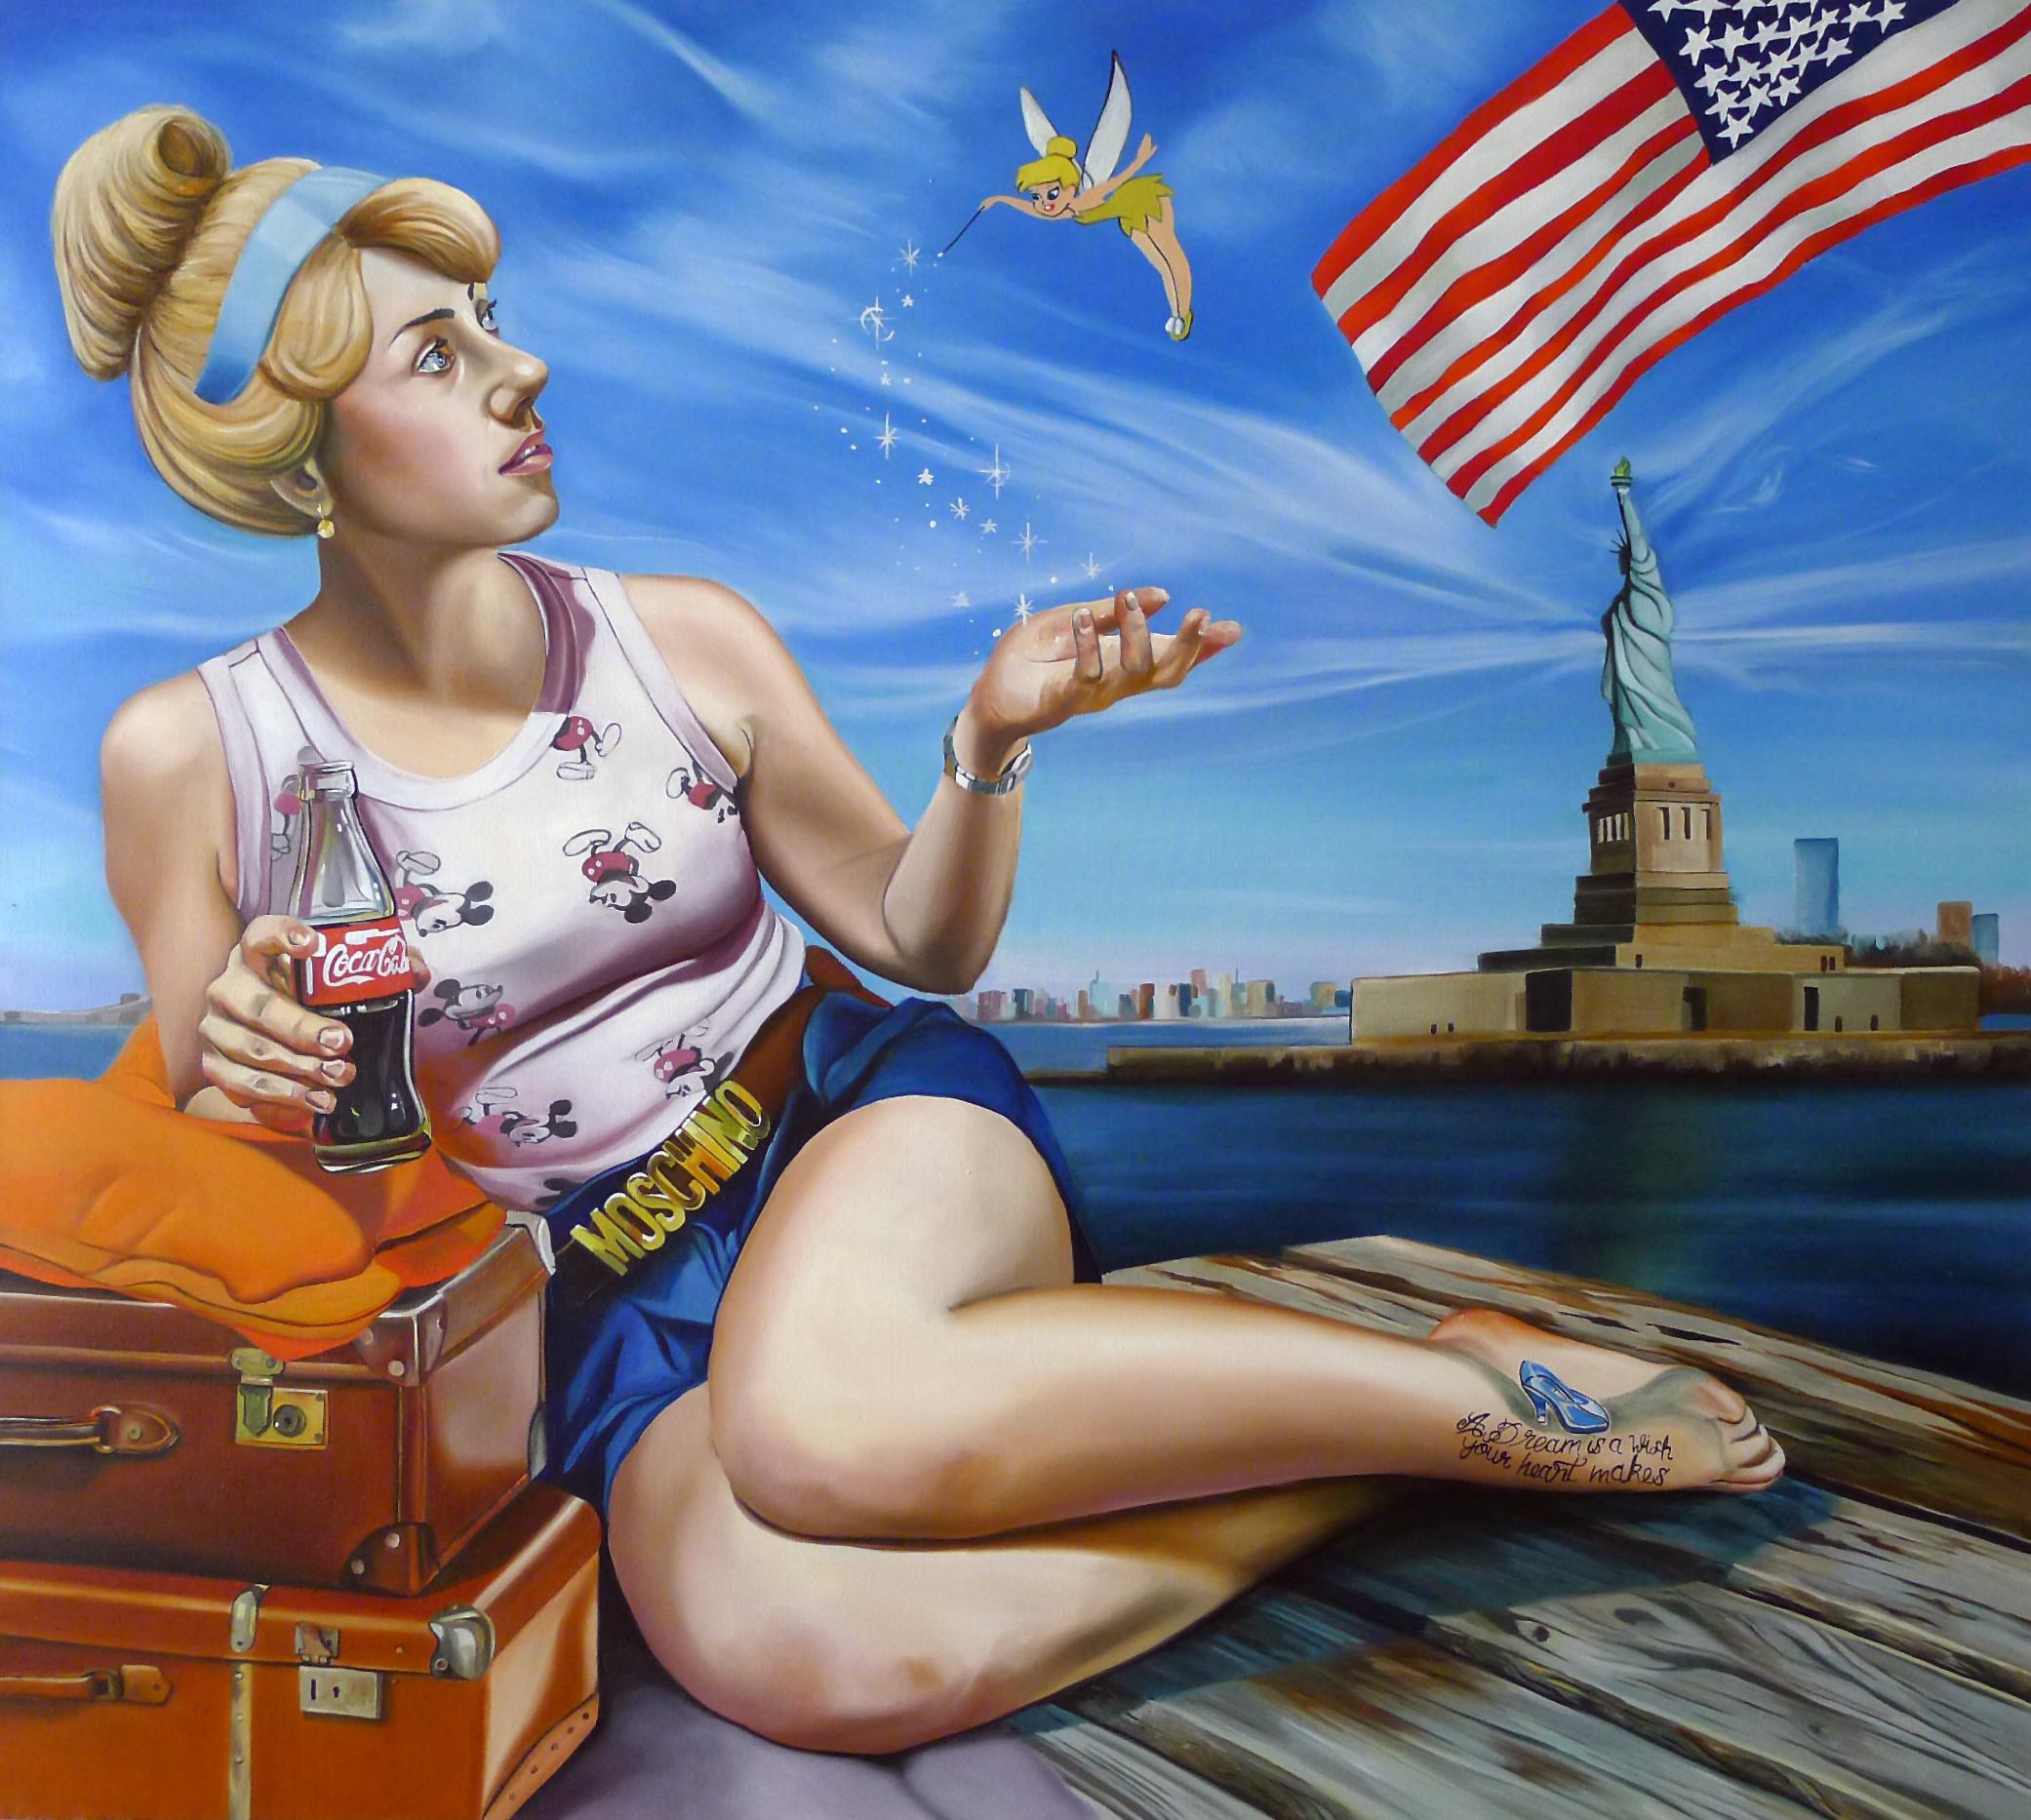 CINDERELLA - surrealist painting with Tinkerbell, Coca-Cola, and American flag